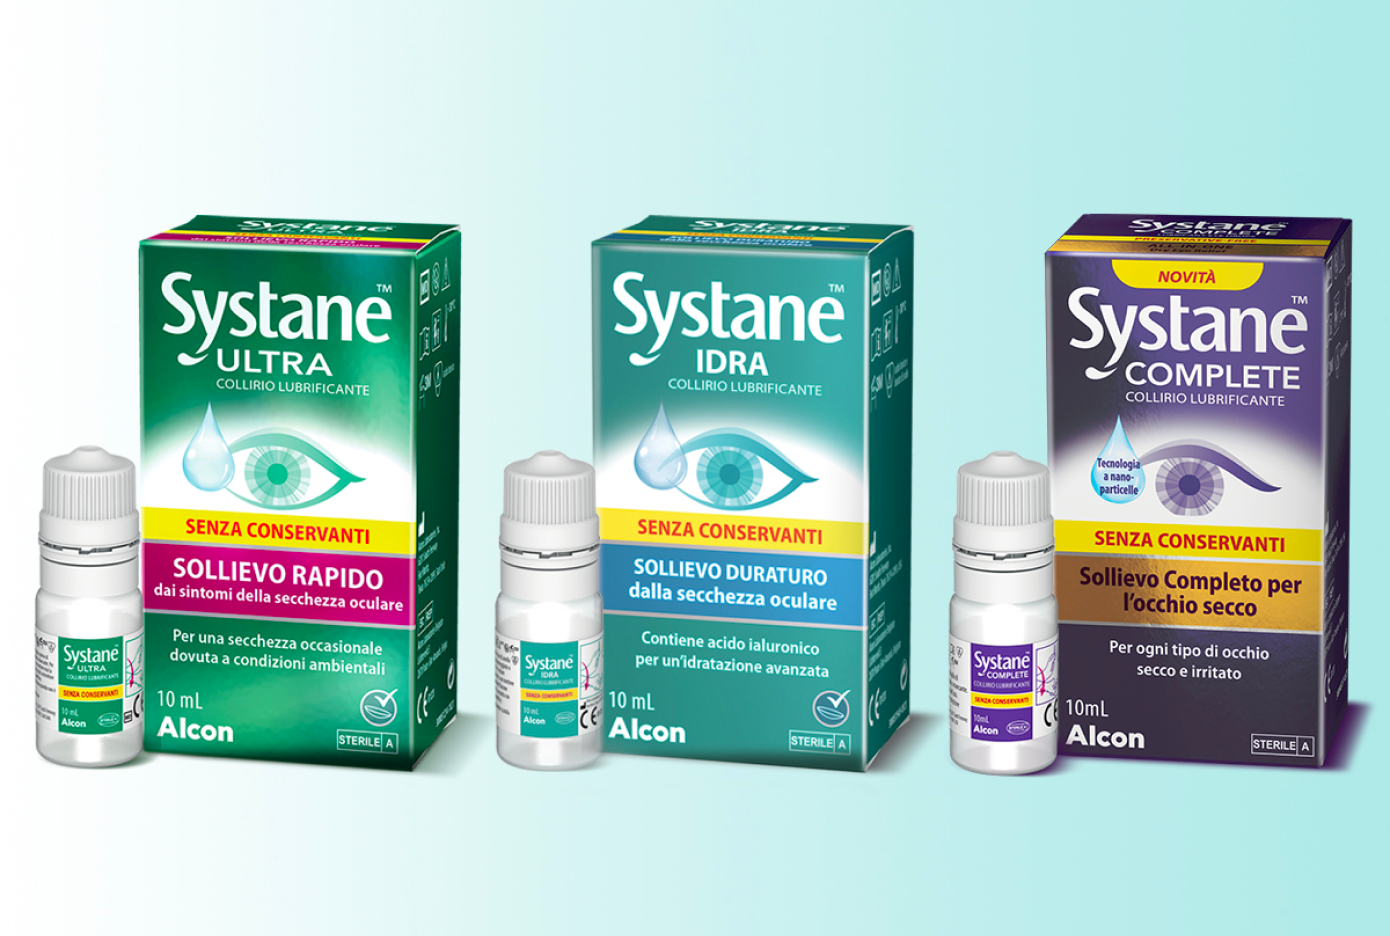 Systane product family